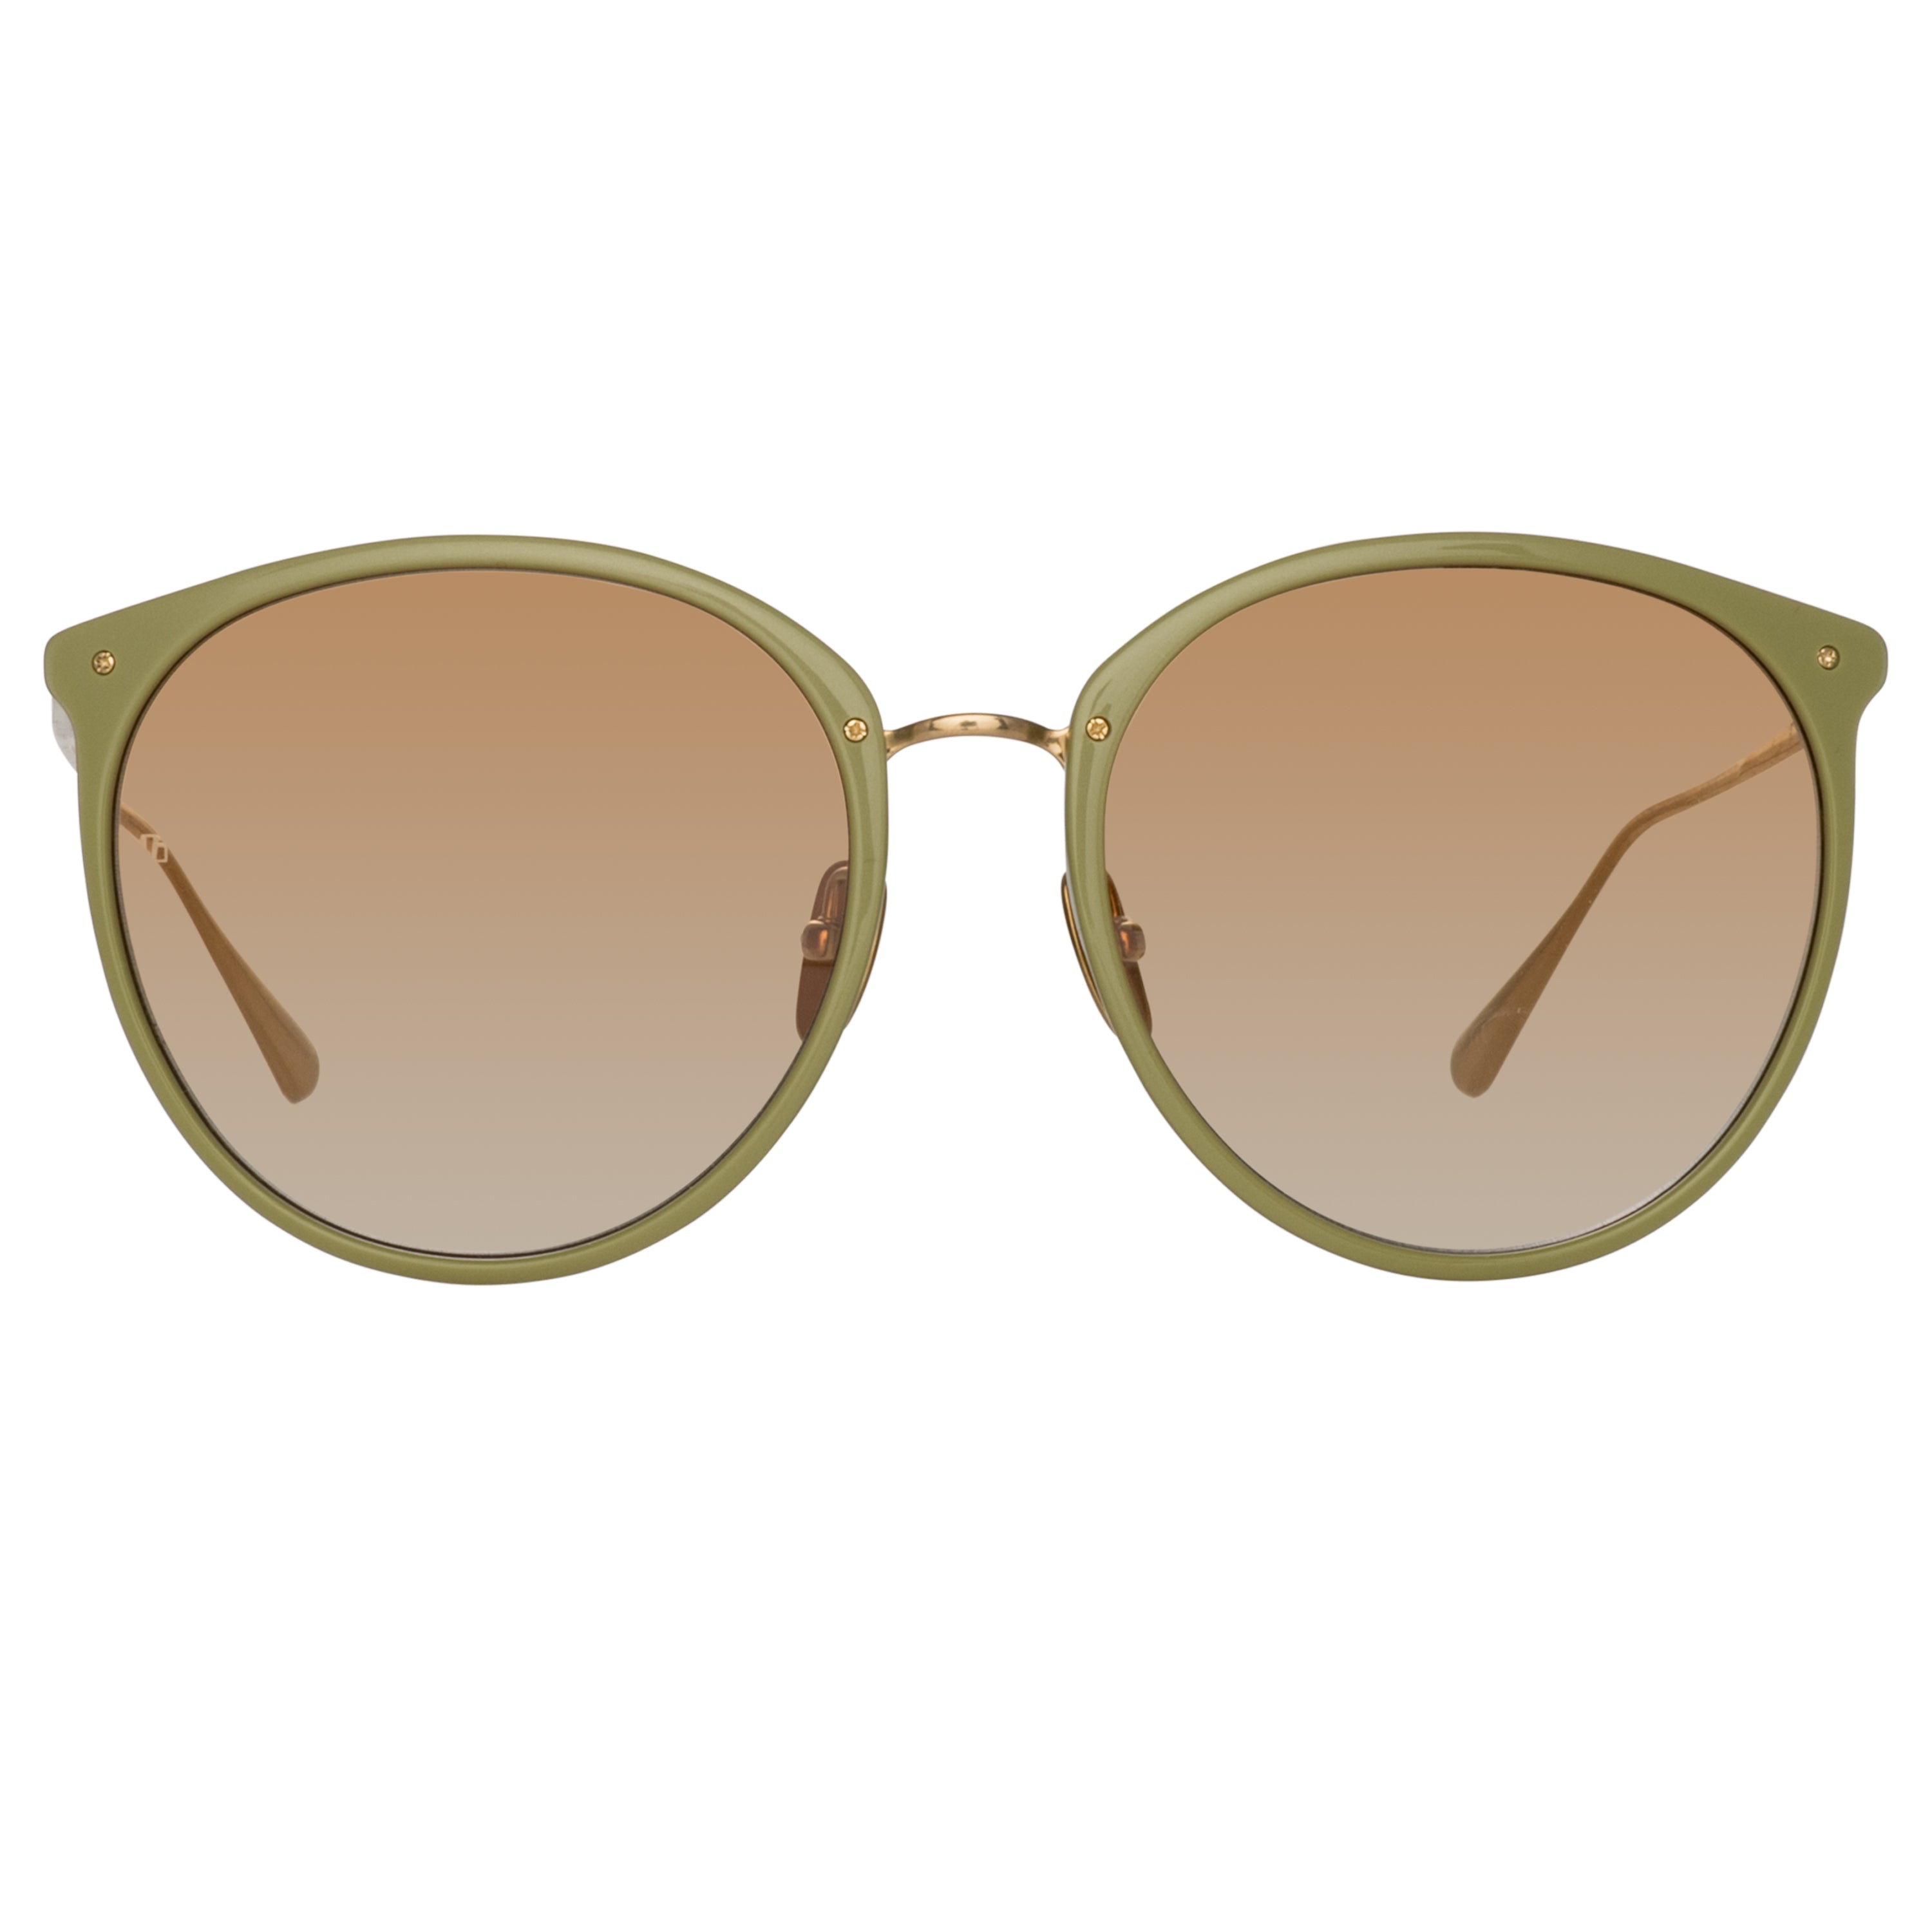 Kings Oversized Sunglasses in Sage